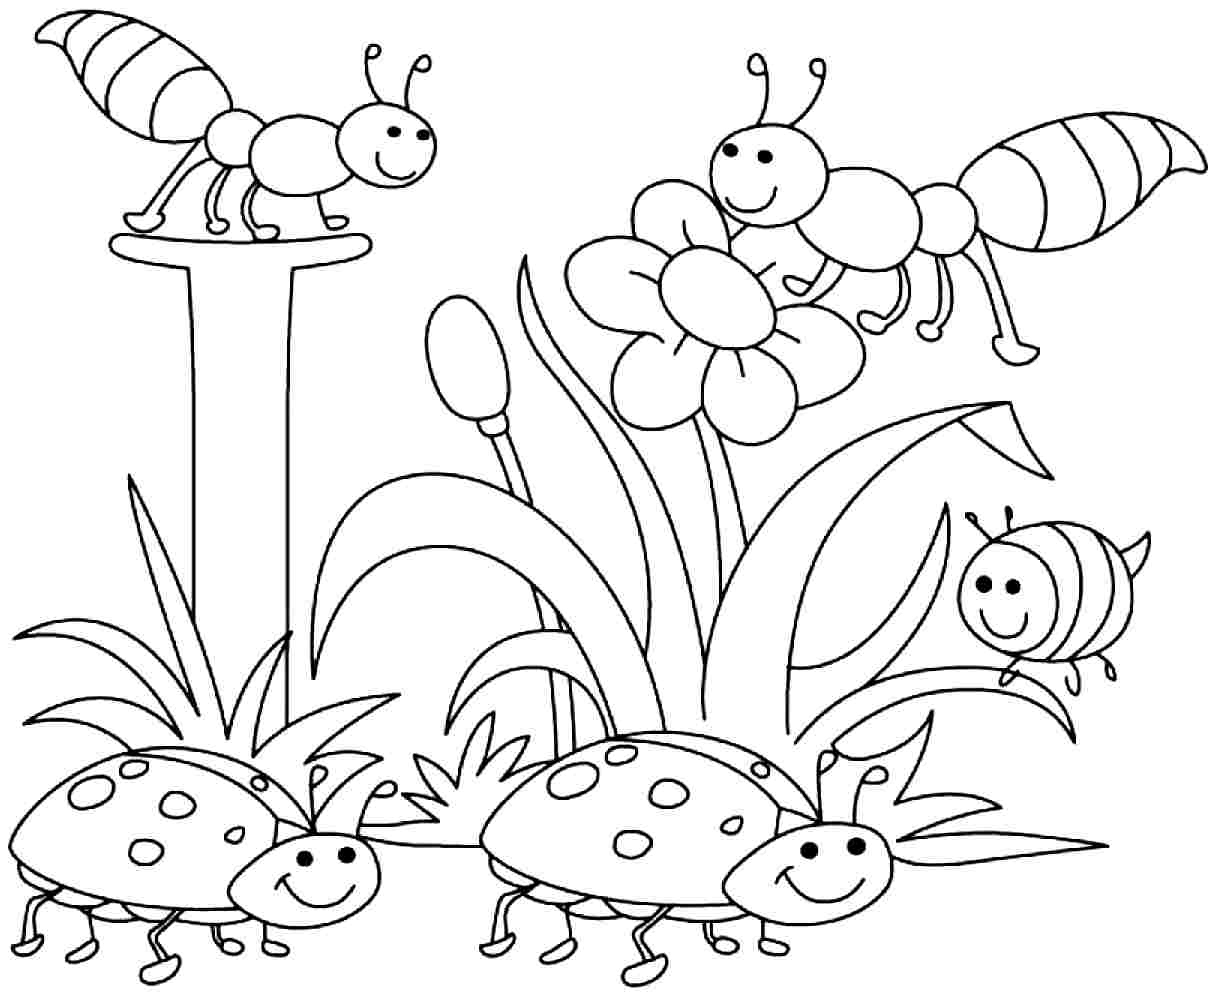 Free Printable Coloring Pages For Kindergarten 20 Coloring Sheets ...